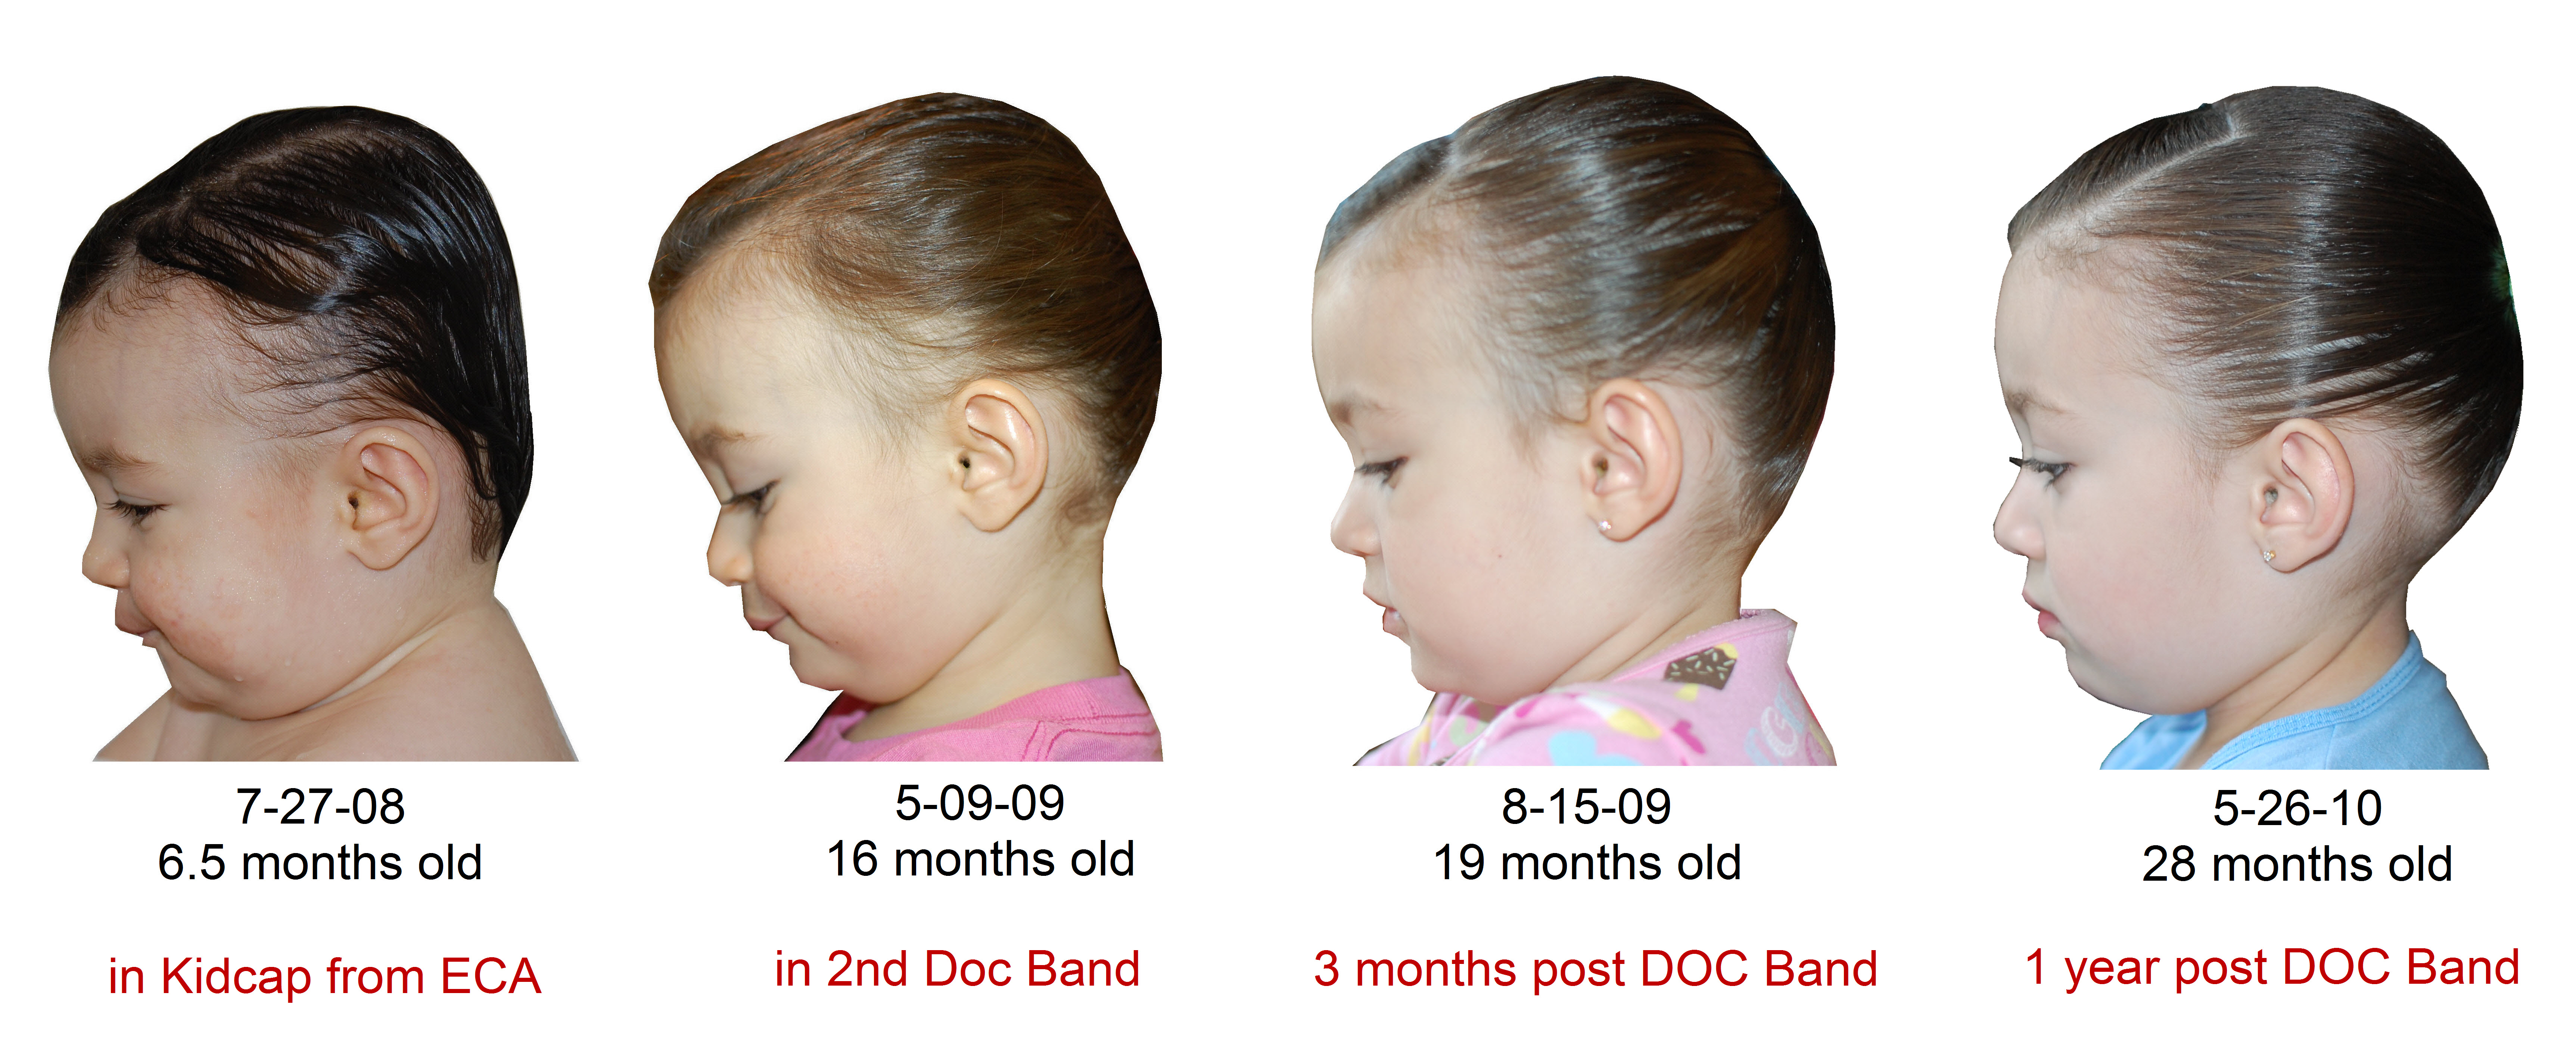 Cranial Technologies - Check out this DOC Band Baby in the arms of